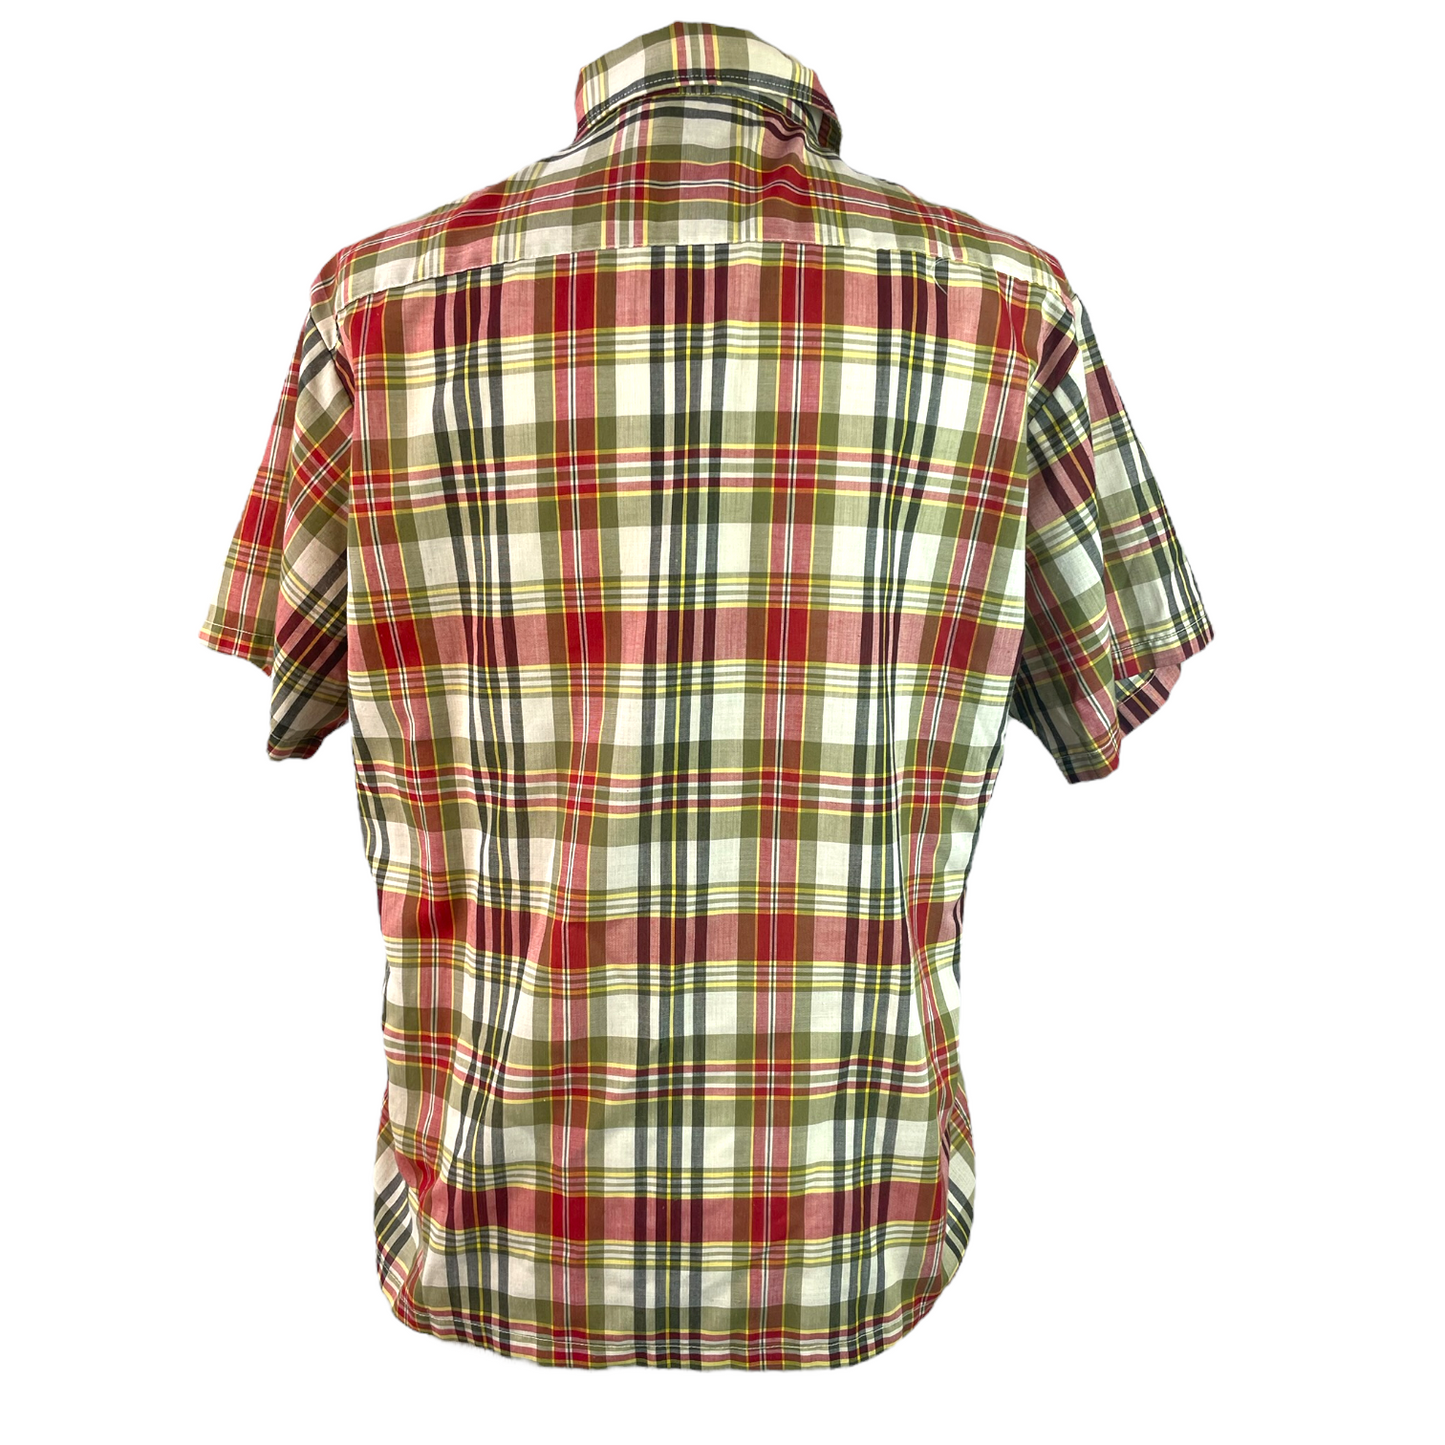 Vintage Green and Red Plaid Summer Shirt